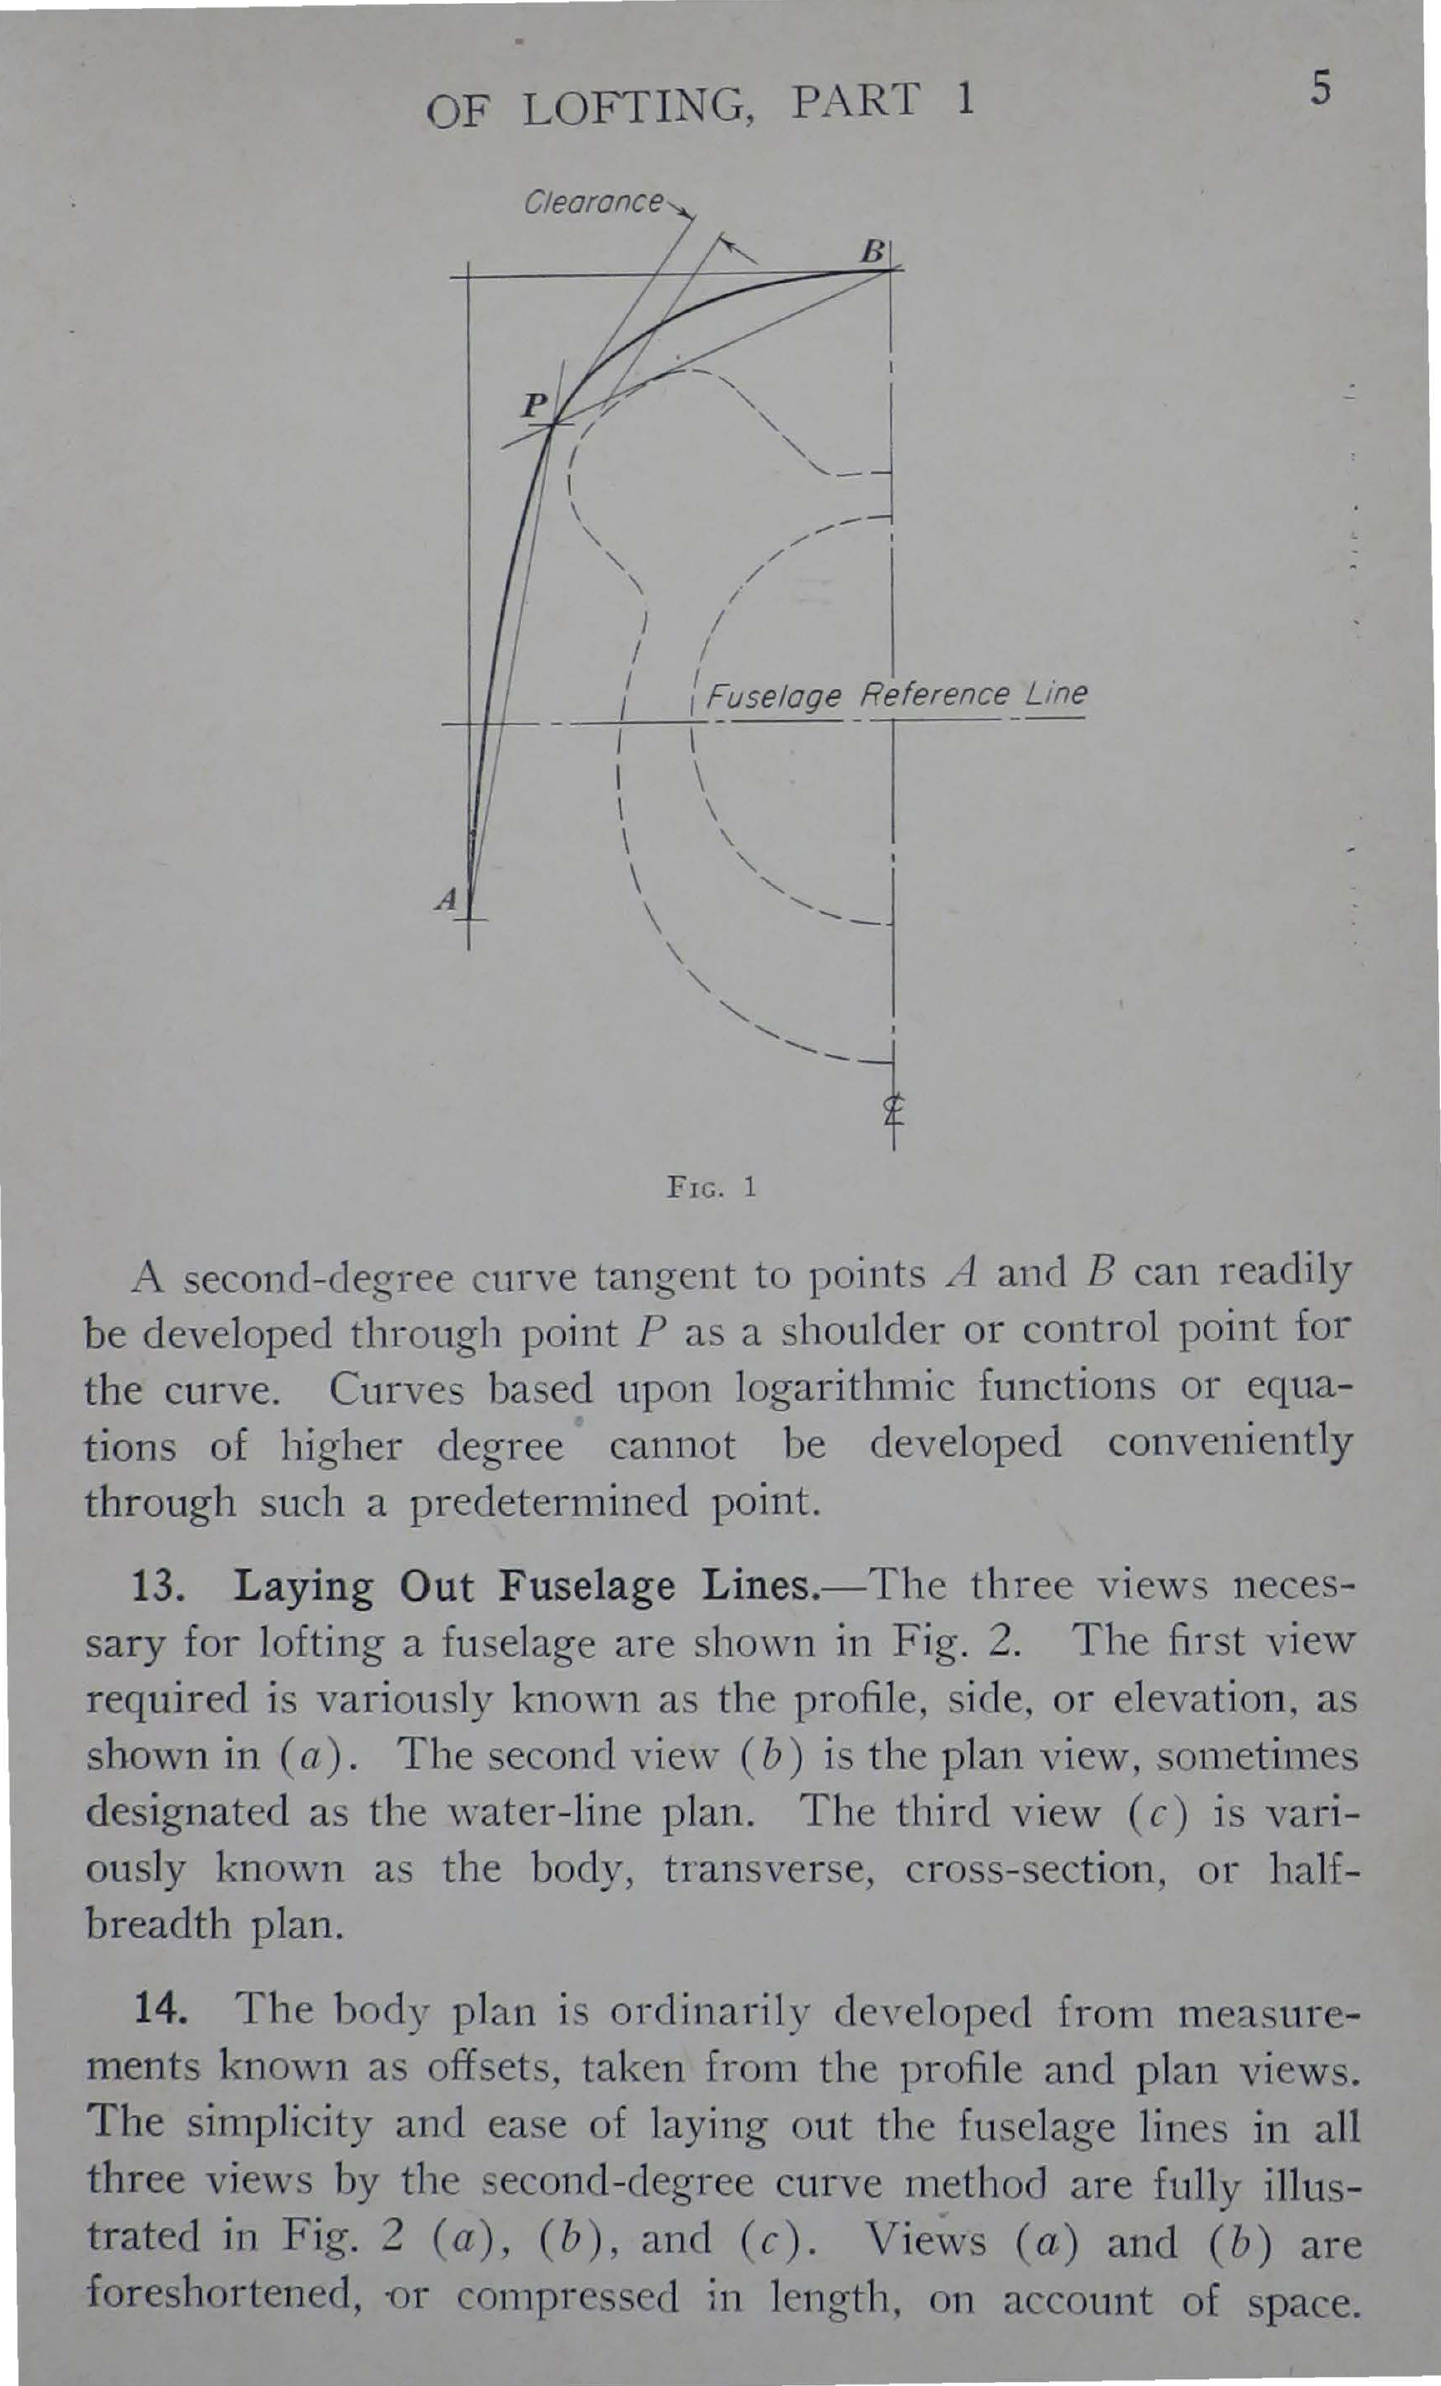 Sample page 7 from AirCorps Library document: Mathematical Technique of Lofting - Part 1 - Bureau of Aeronautics, 